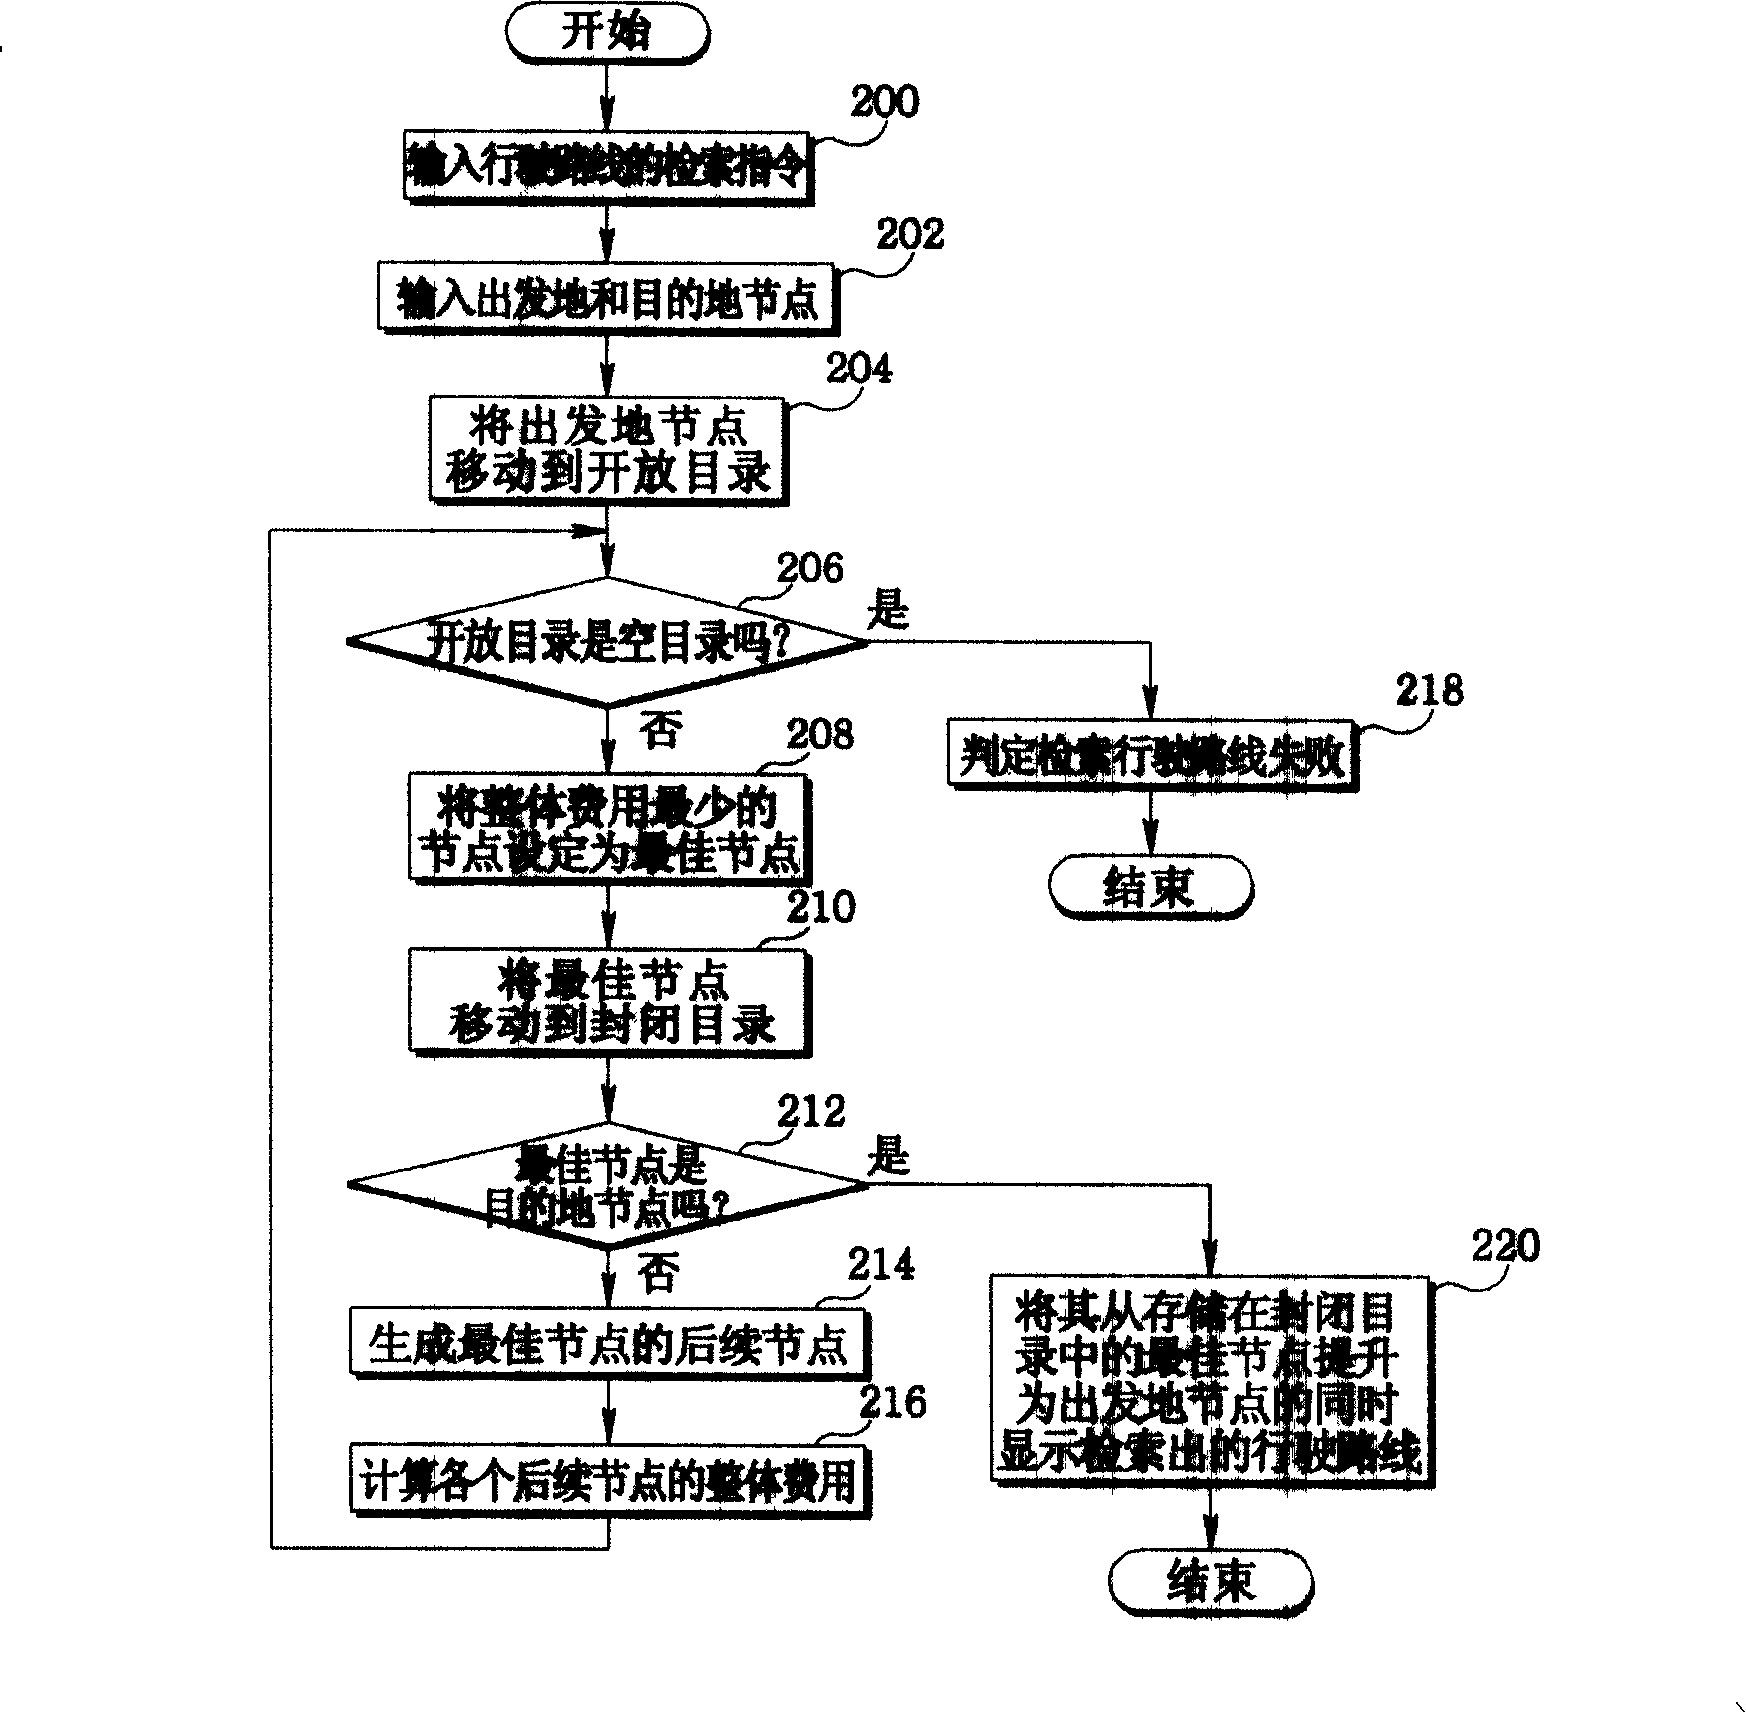 Method for retrieval of run course of mobile object in guidance system